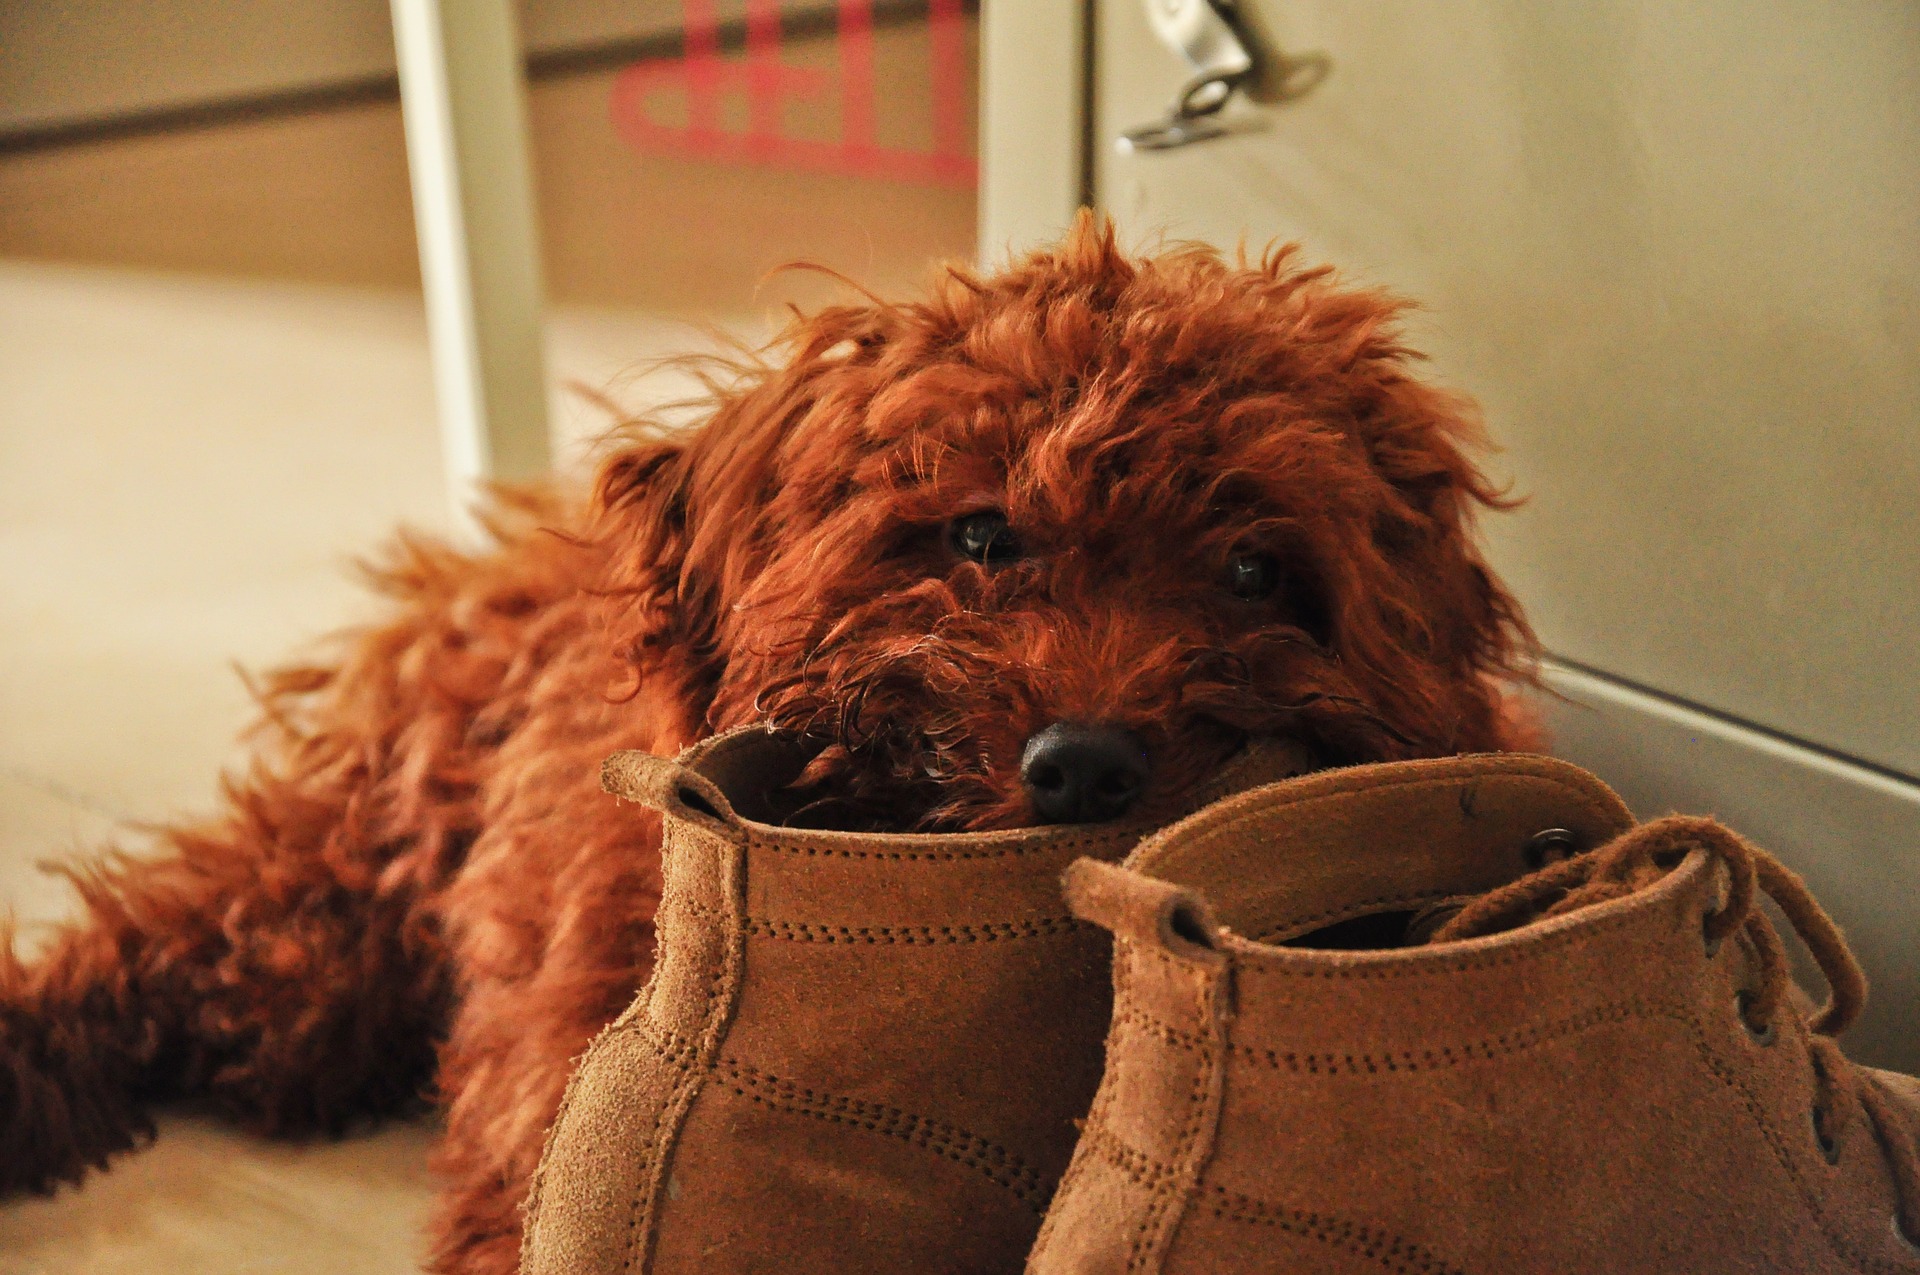 Shoes can look like lots of fun for pets who chew!